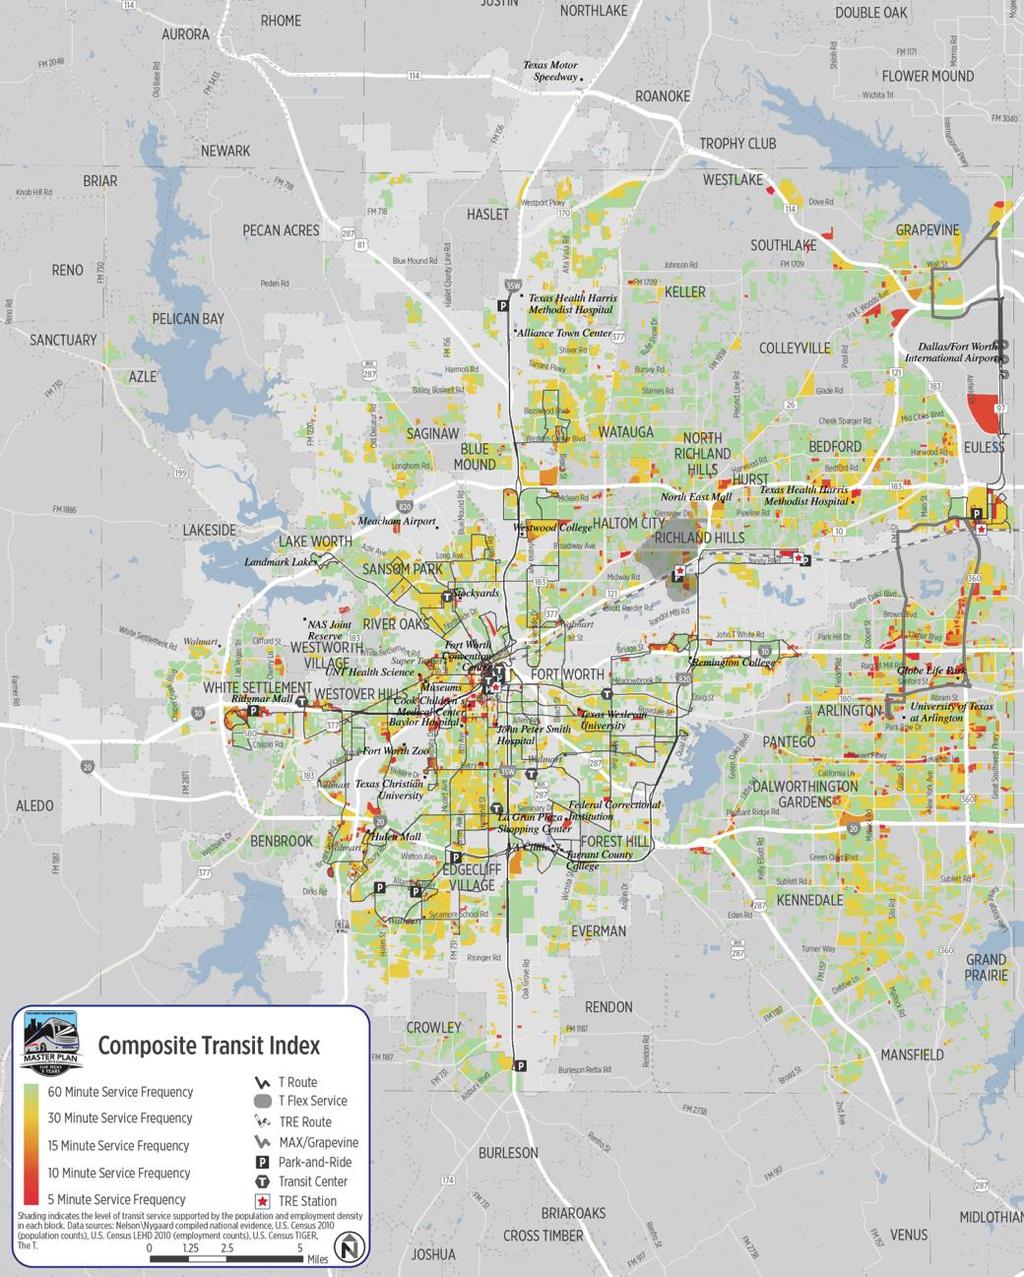 Note: These maps indicate underlying transit demand on a block group basis, and all routes serve many block groups.